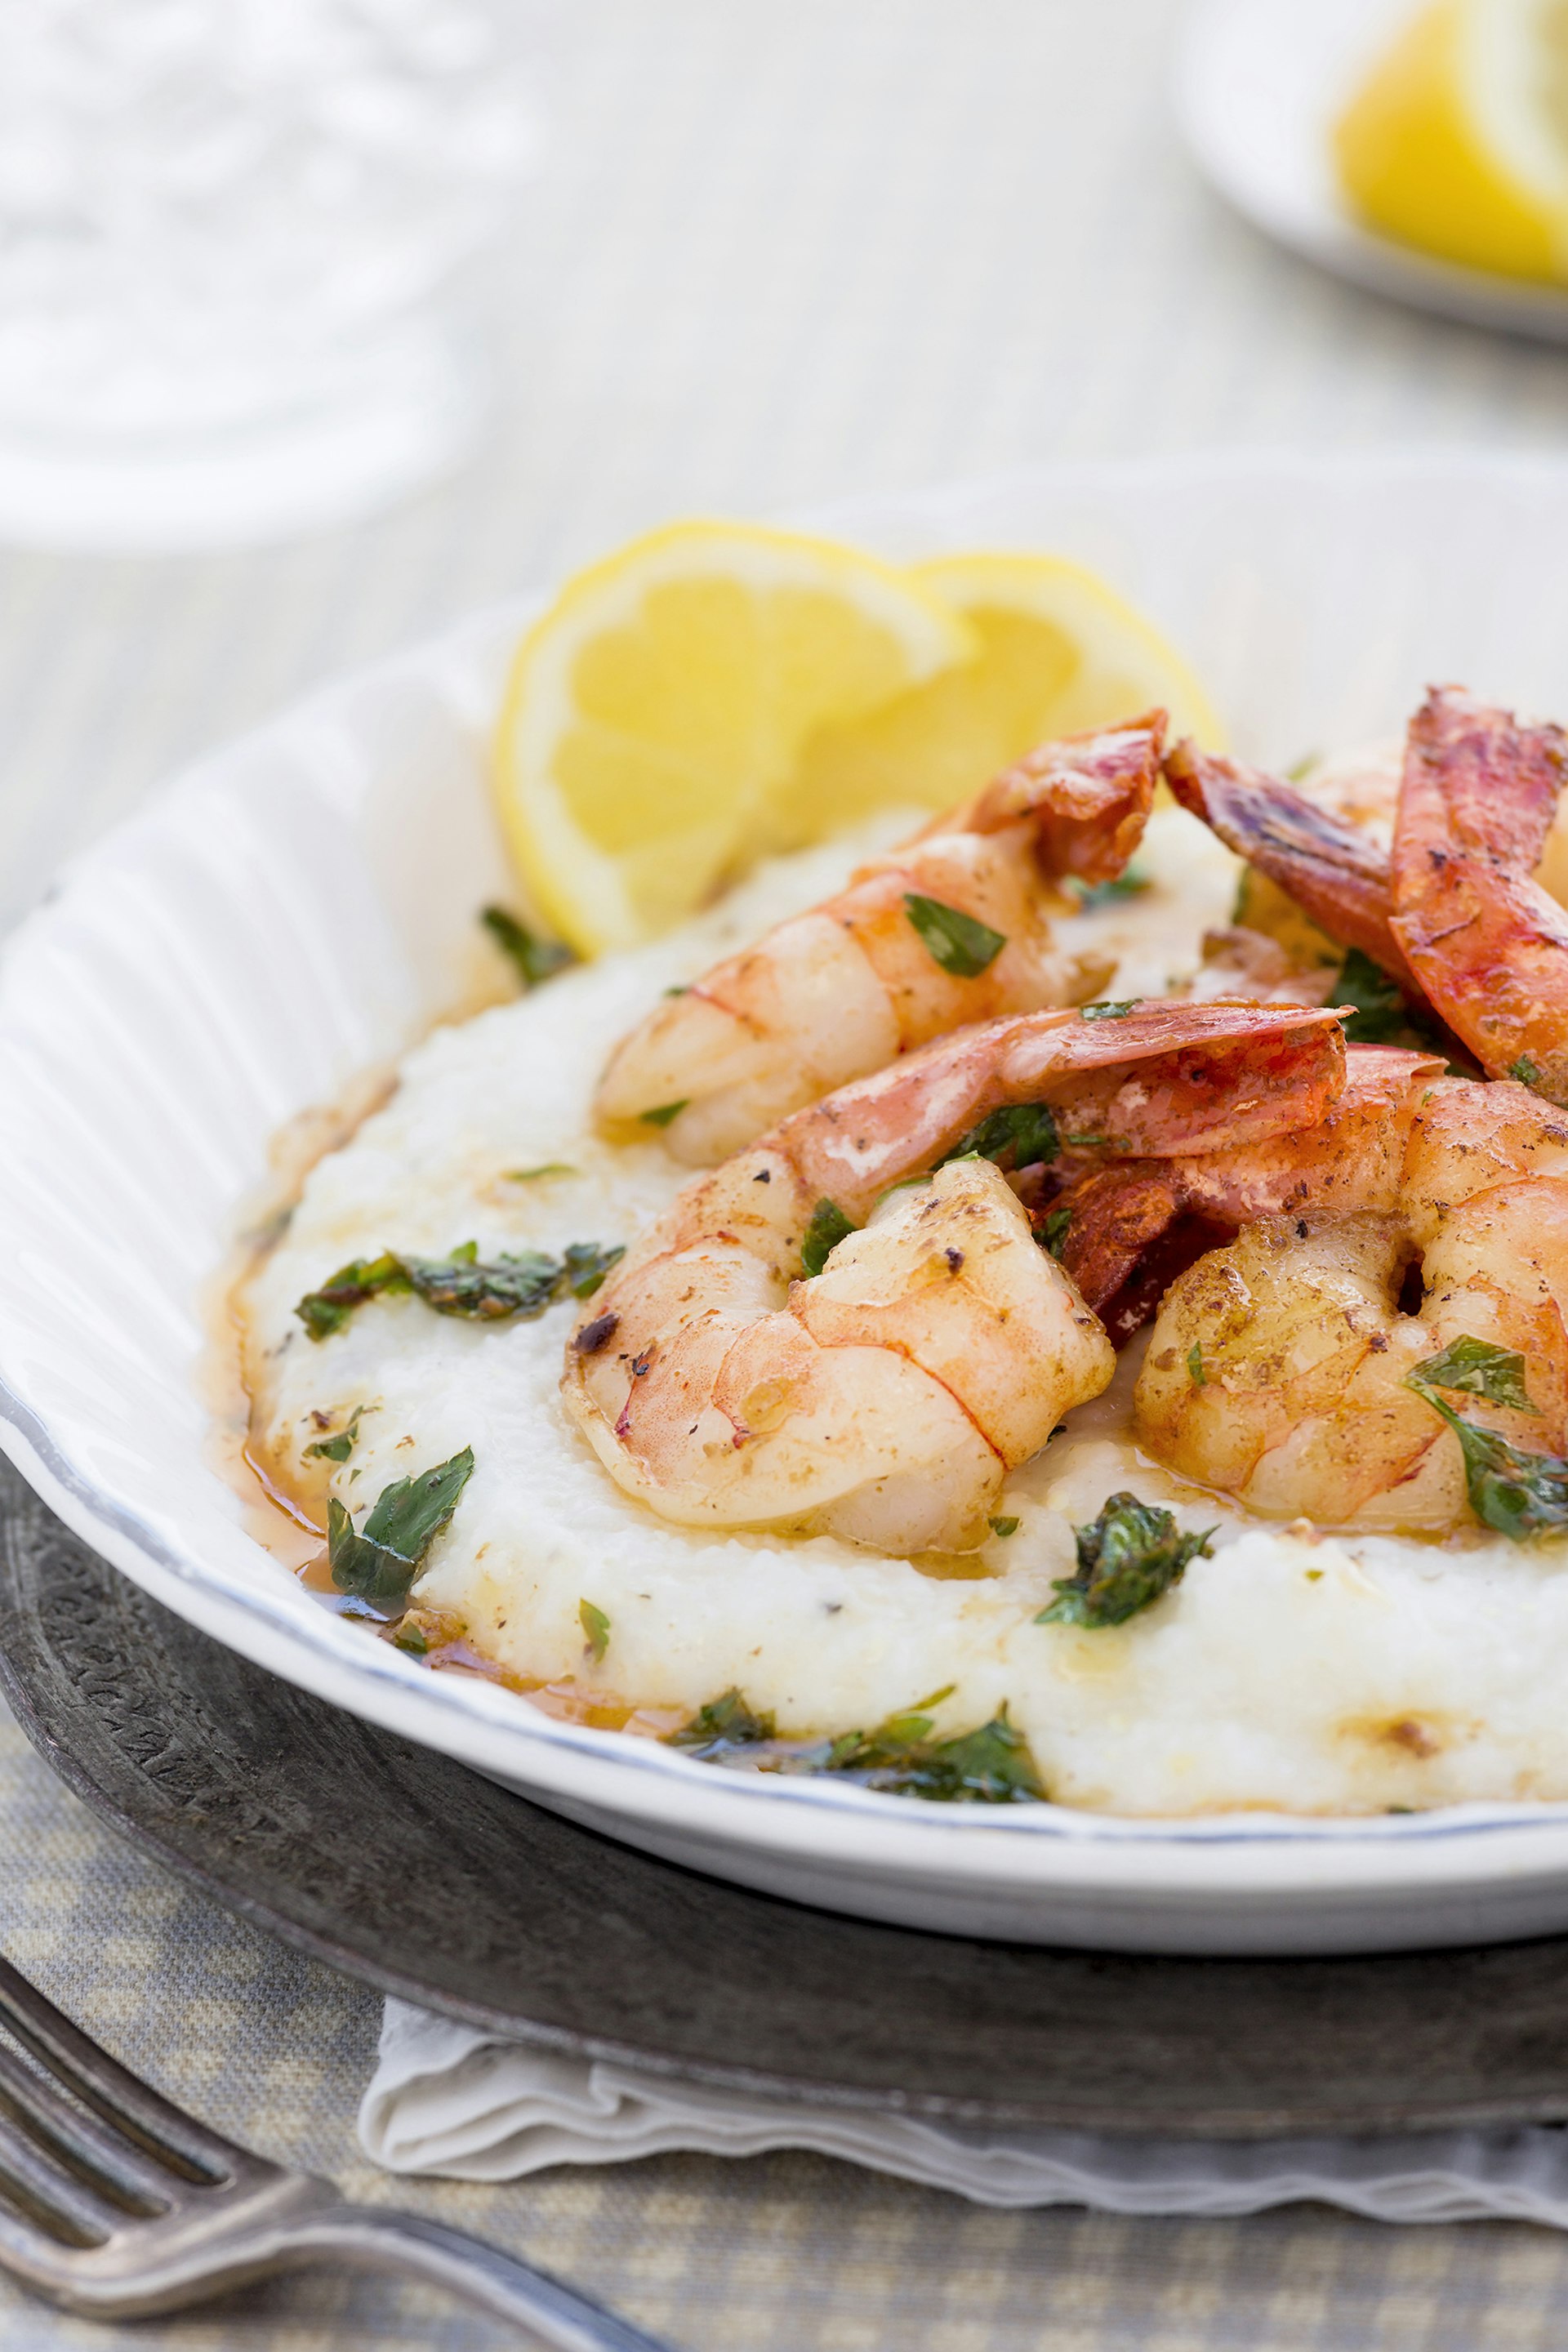 Close-up shot of a bowl of shrimp and grits, with lemon wedges on the side © nicolesy / Getty Images